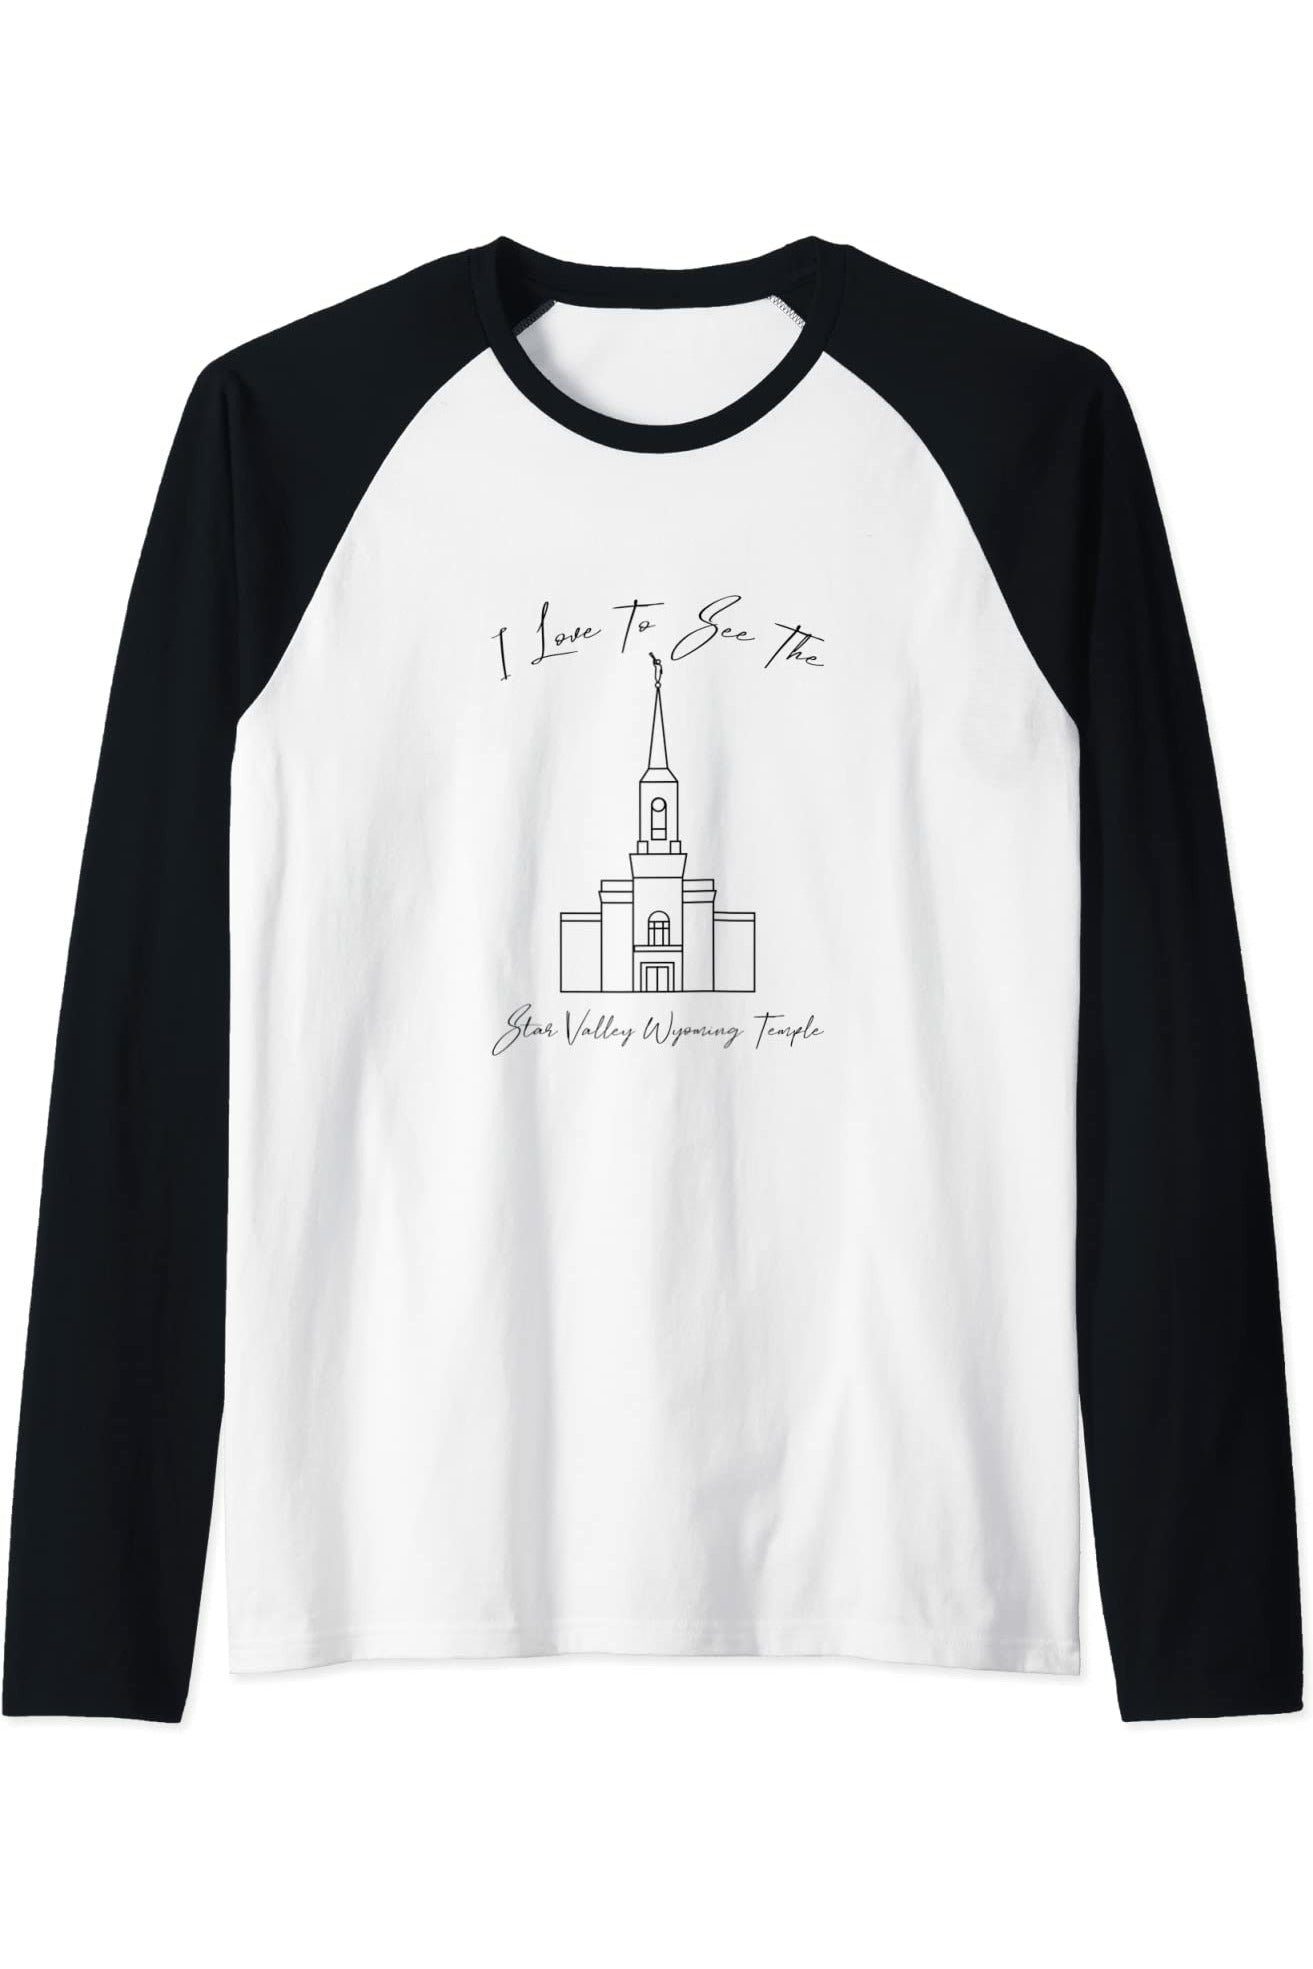 Star Valley Wyoming Temple Raglan - Calligraphy Style (English) US